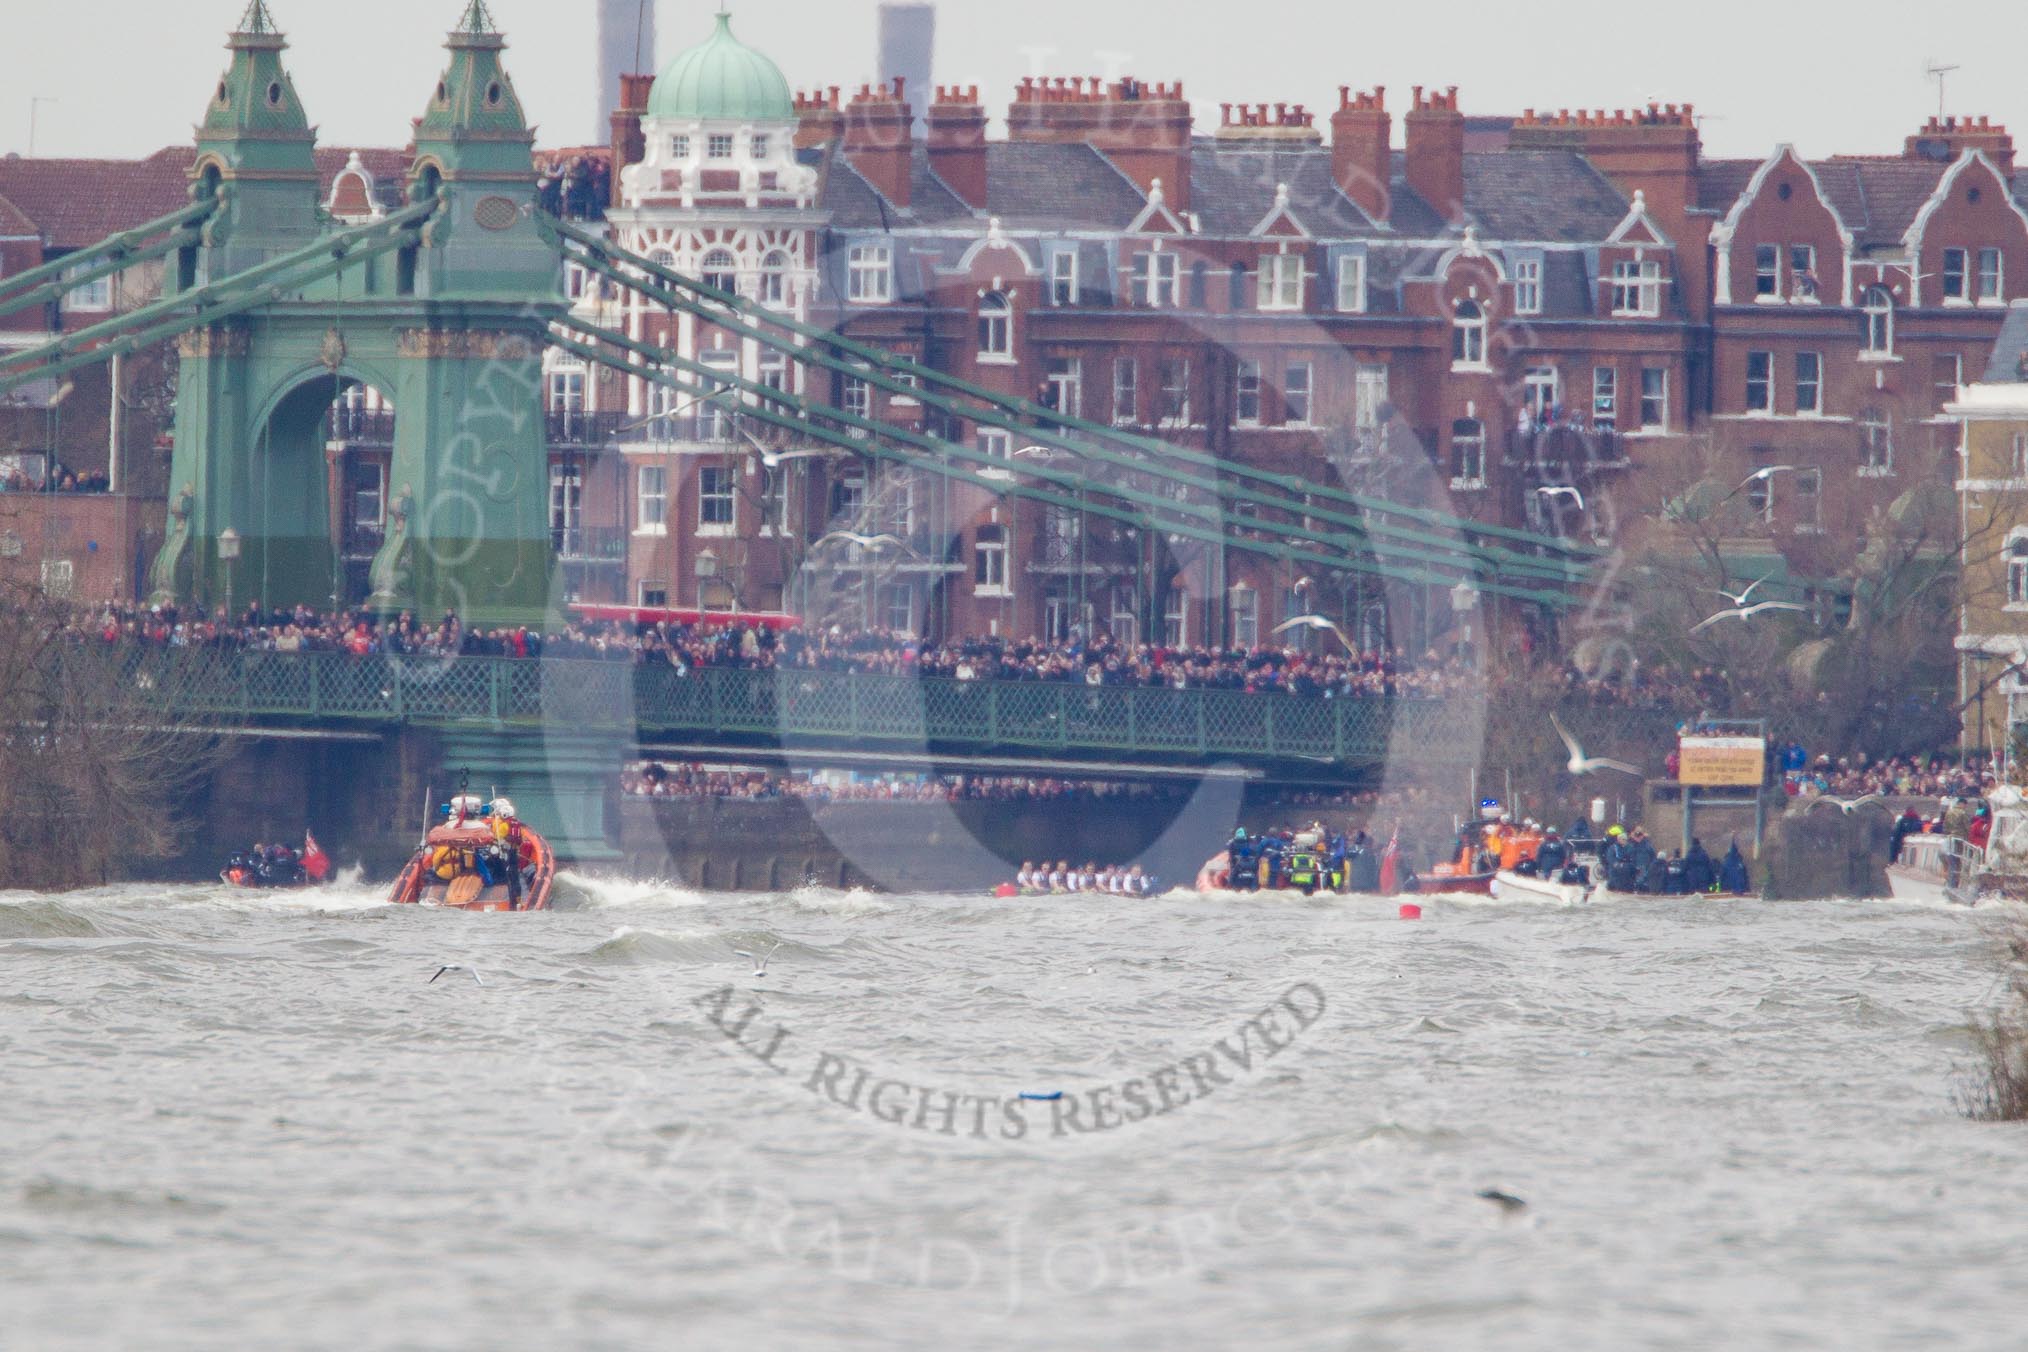 The Boat Race 2013.
Putney,
London SW15,

United Kingdom,
on 31 March 2013 at 16:37, image #345